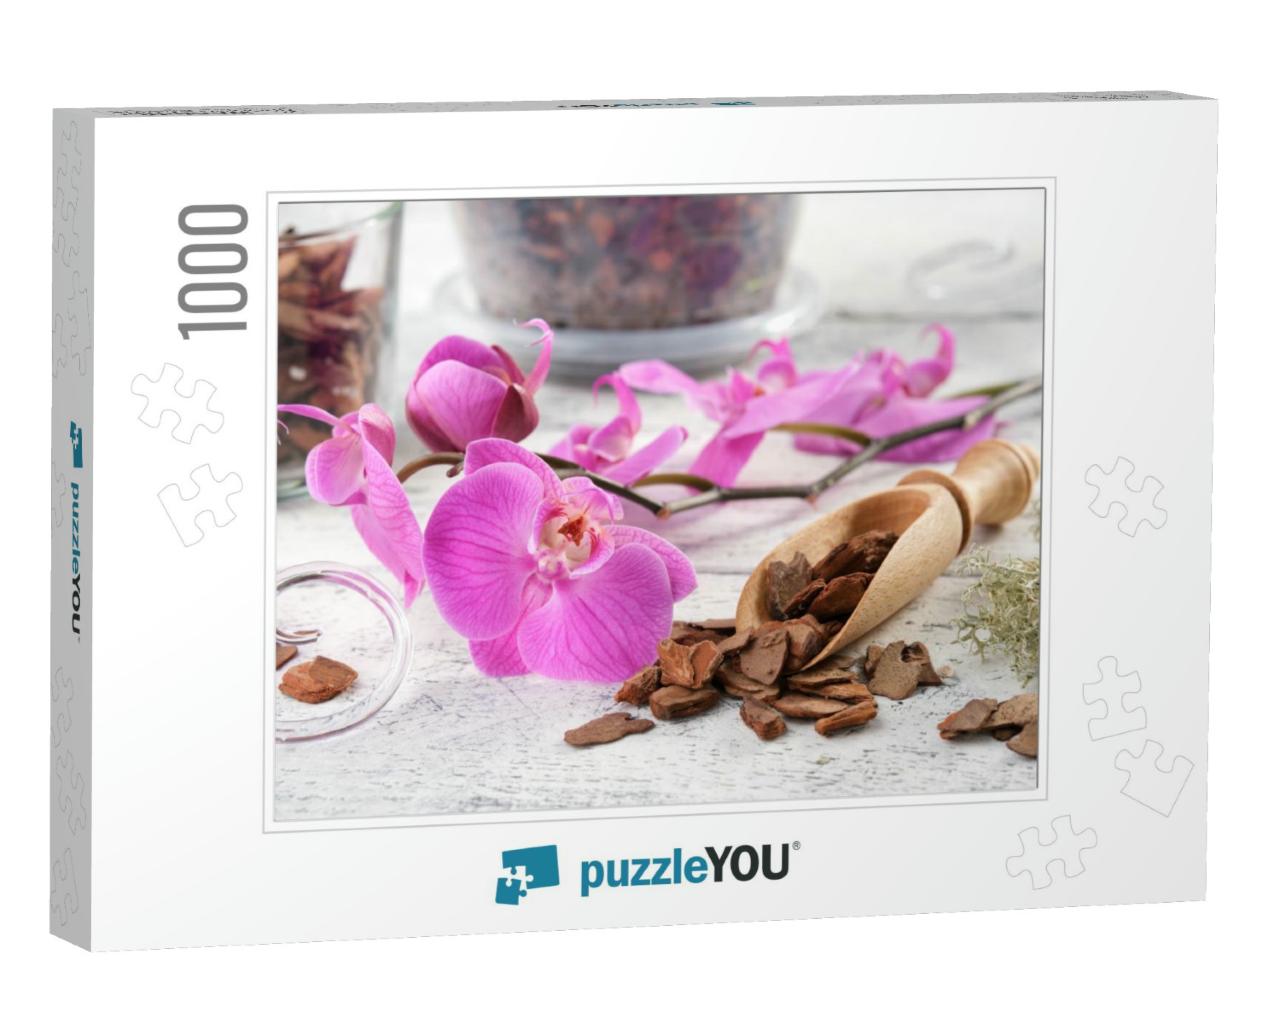 Beautiful Purple Orchid Flower & Wooden Scoop of Pine Bar... Jigsaw Puzzle with 1000 pieces